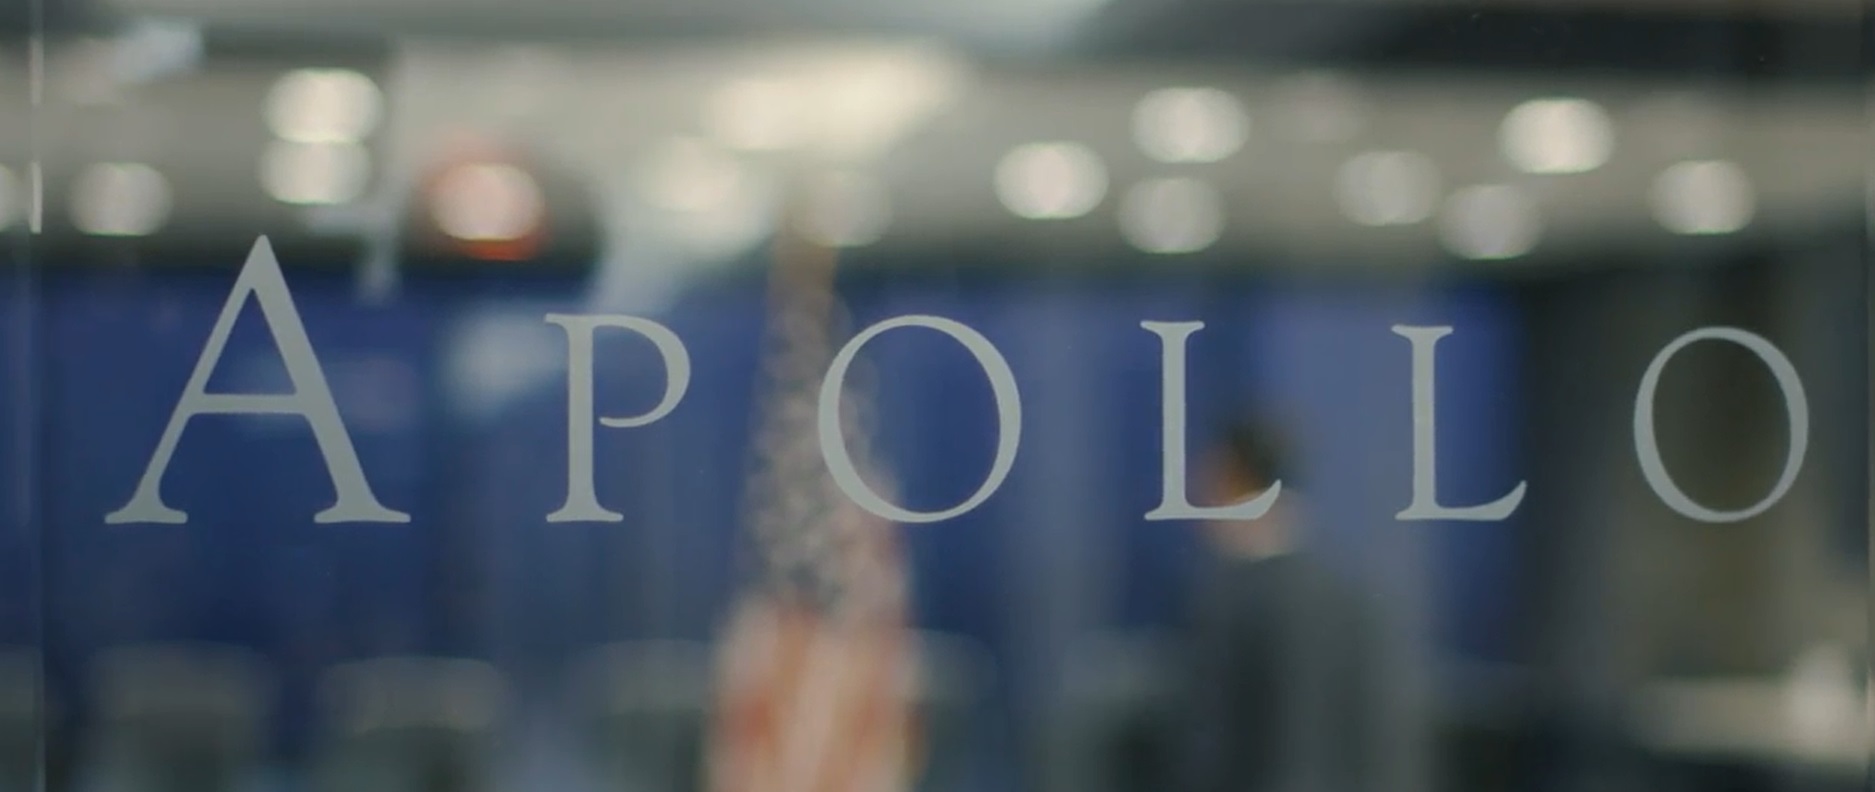 Apollo Commits to Over $1 Billion in Diverse Spend with Minority, Women-Owned Businesses